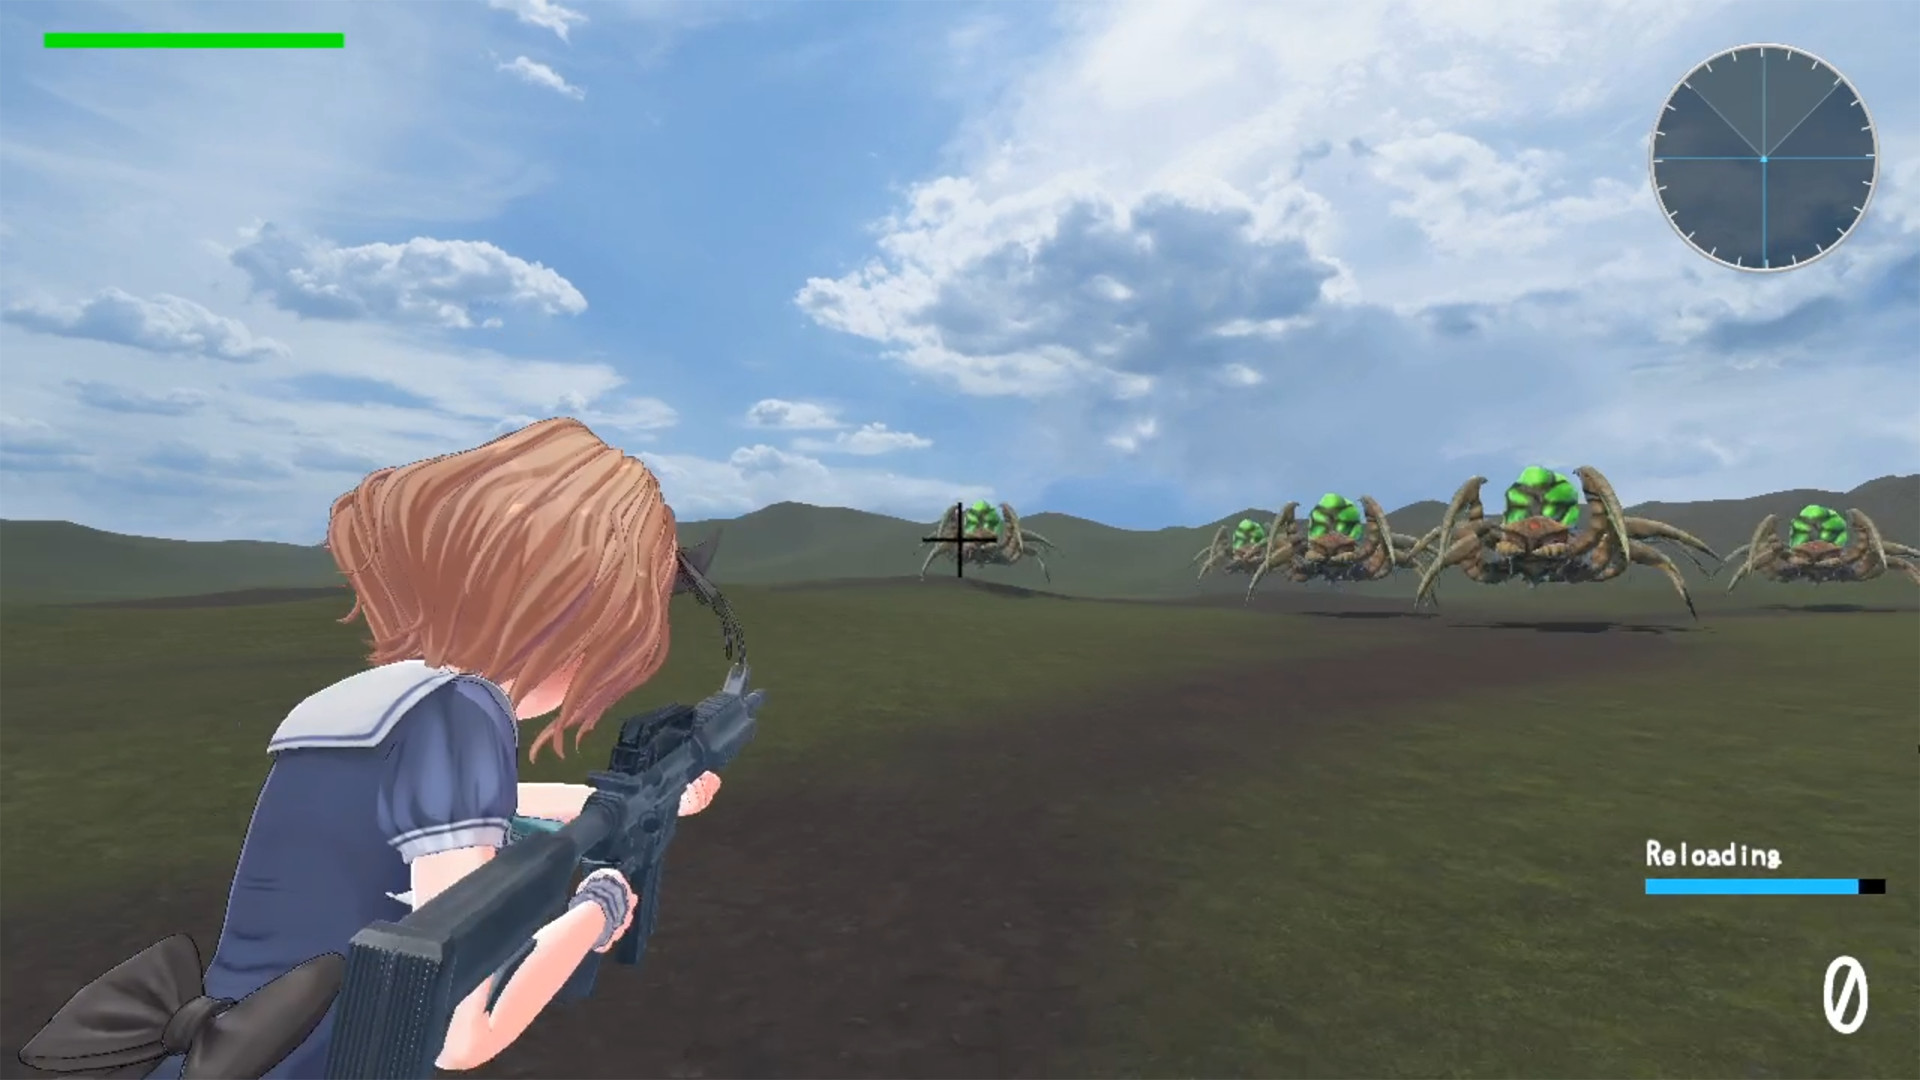 Proto Shooter Lychee Free Download